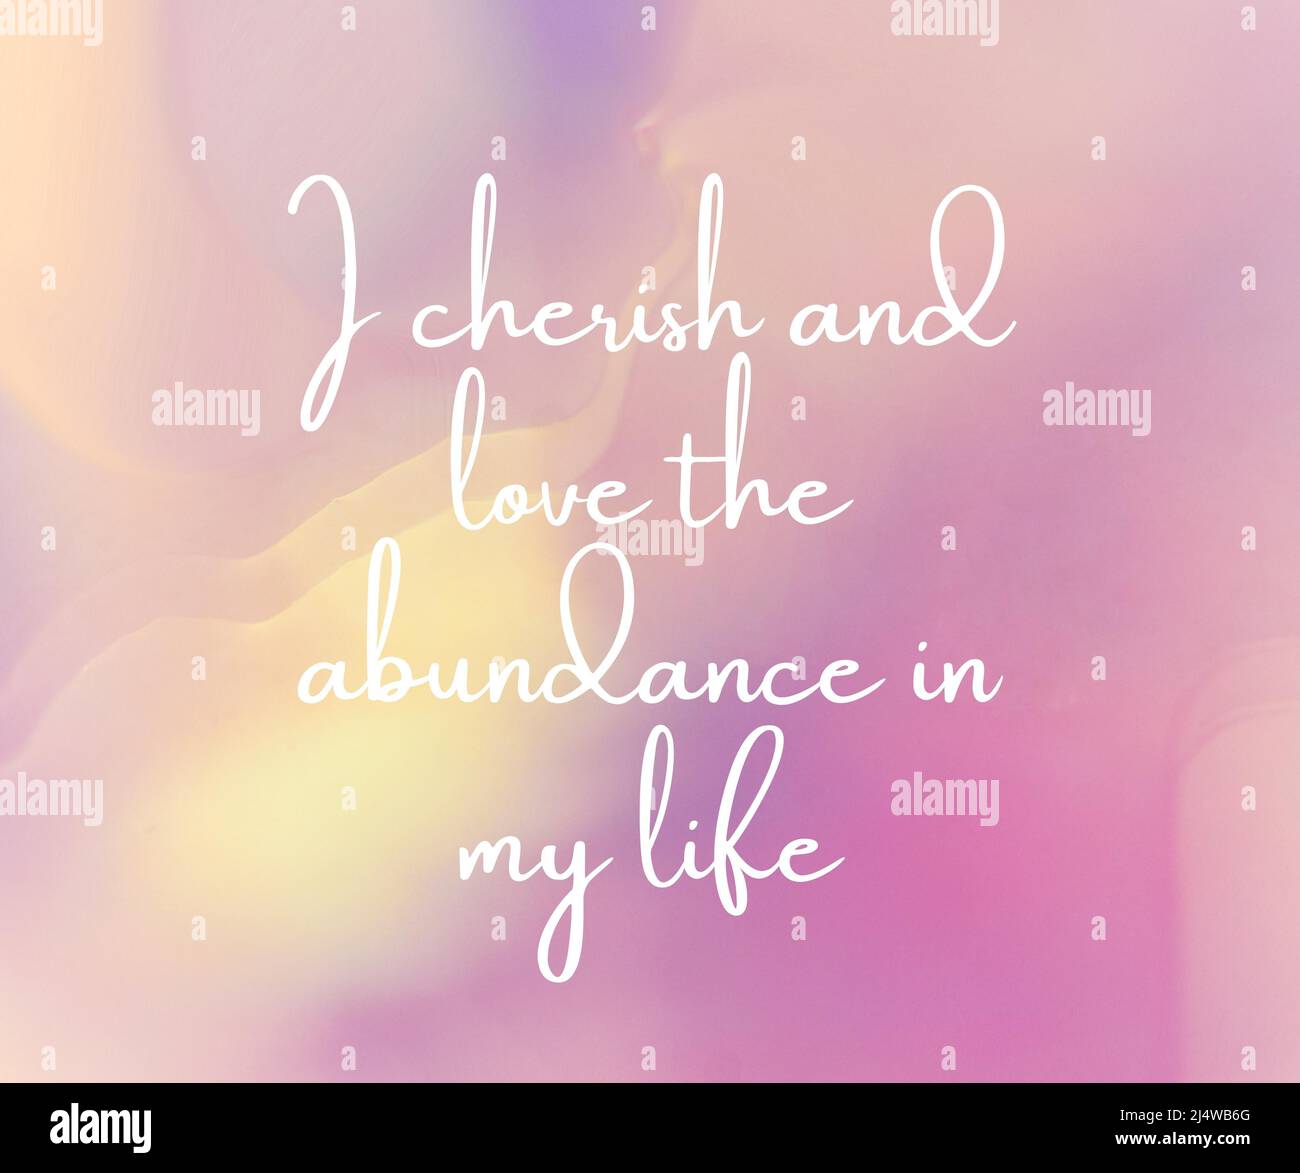 Daily affirmation quote image: I cherish the love and abundance in